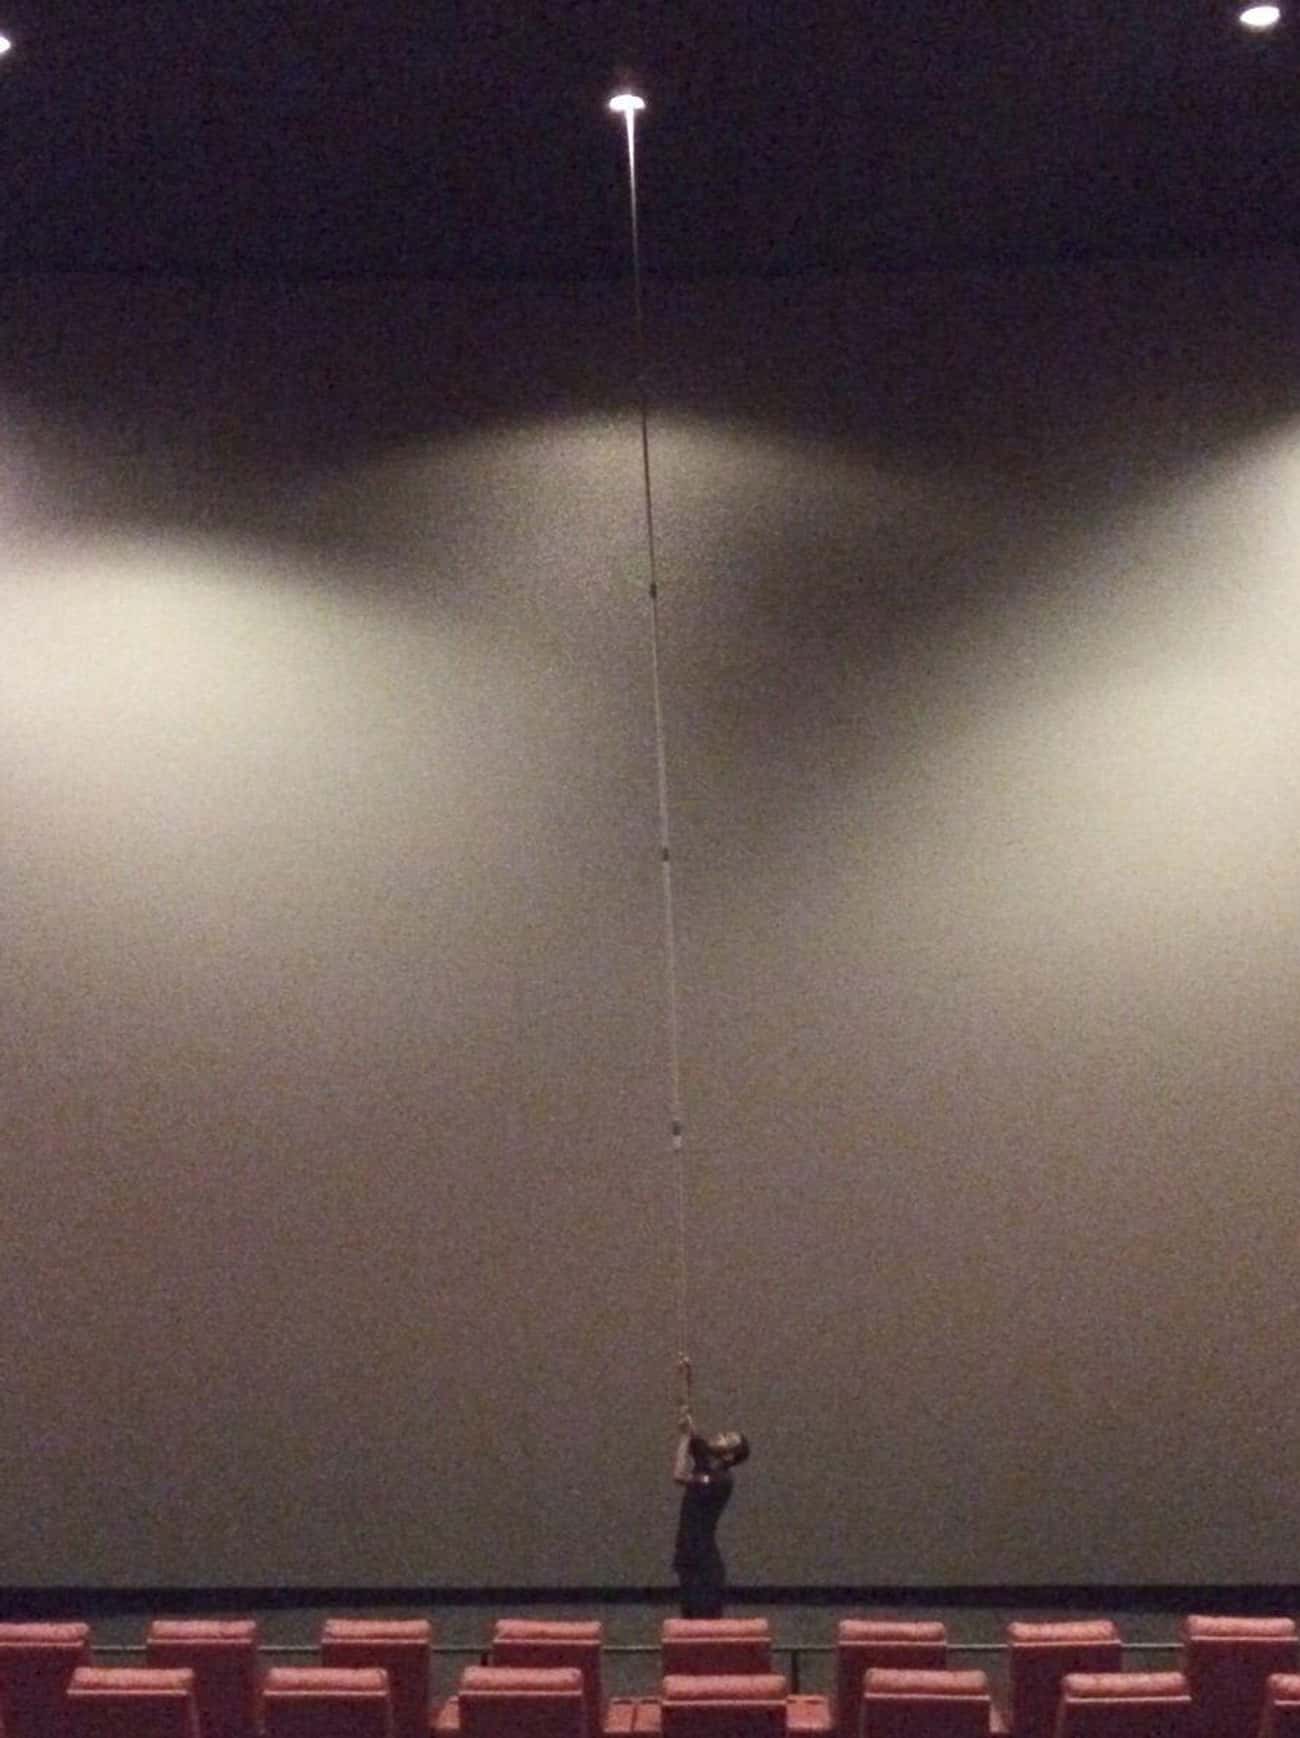 Changing Lightbulbs In An IMAX Theater